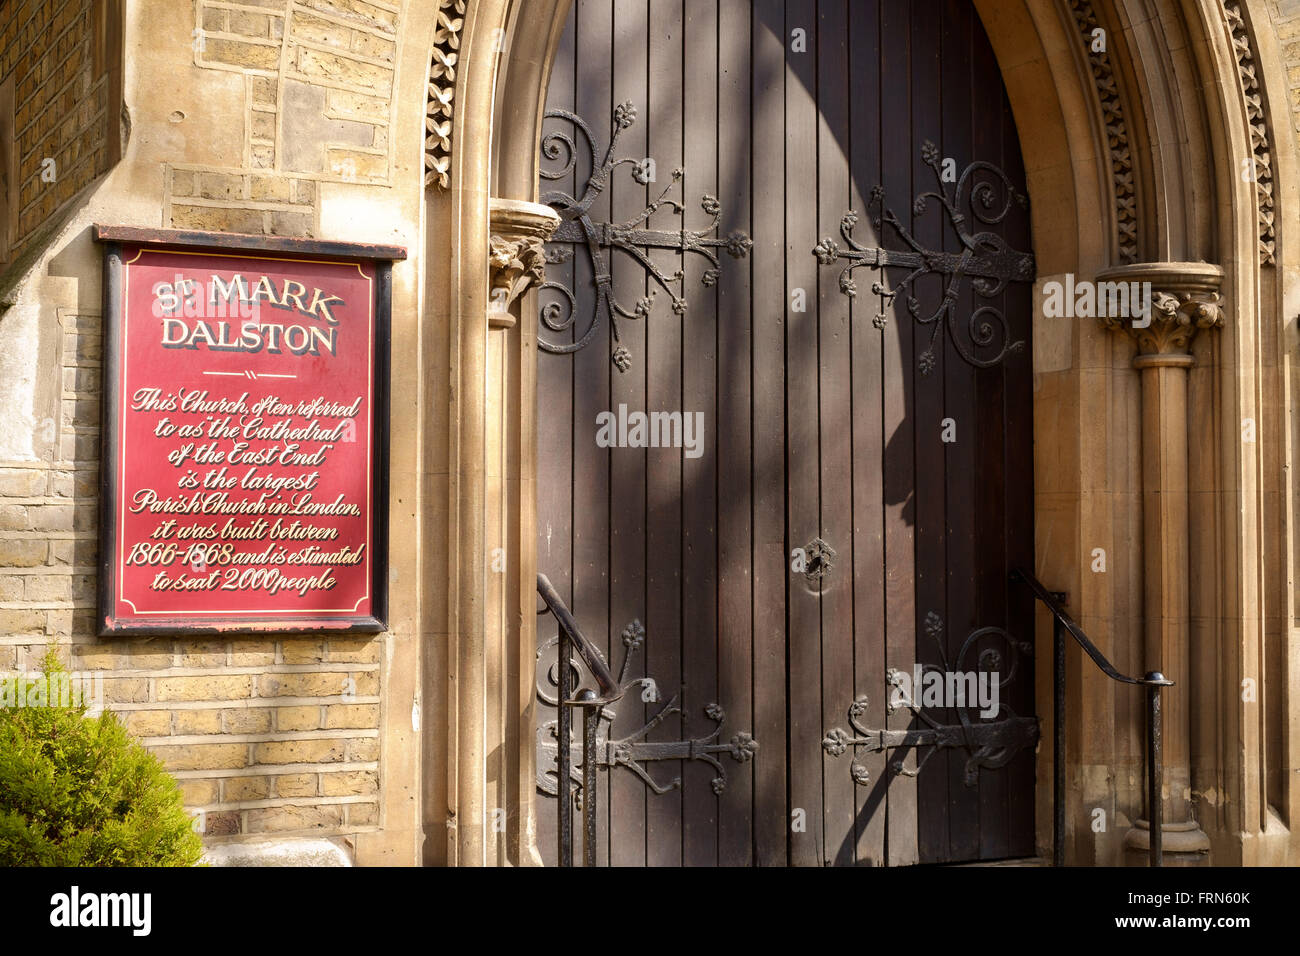 Entrance to St Mark's Dalston, the largest parish church in London. Known as the 'cathedral of the East End' Stock Photo